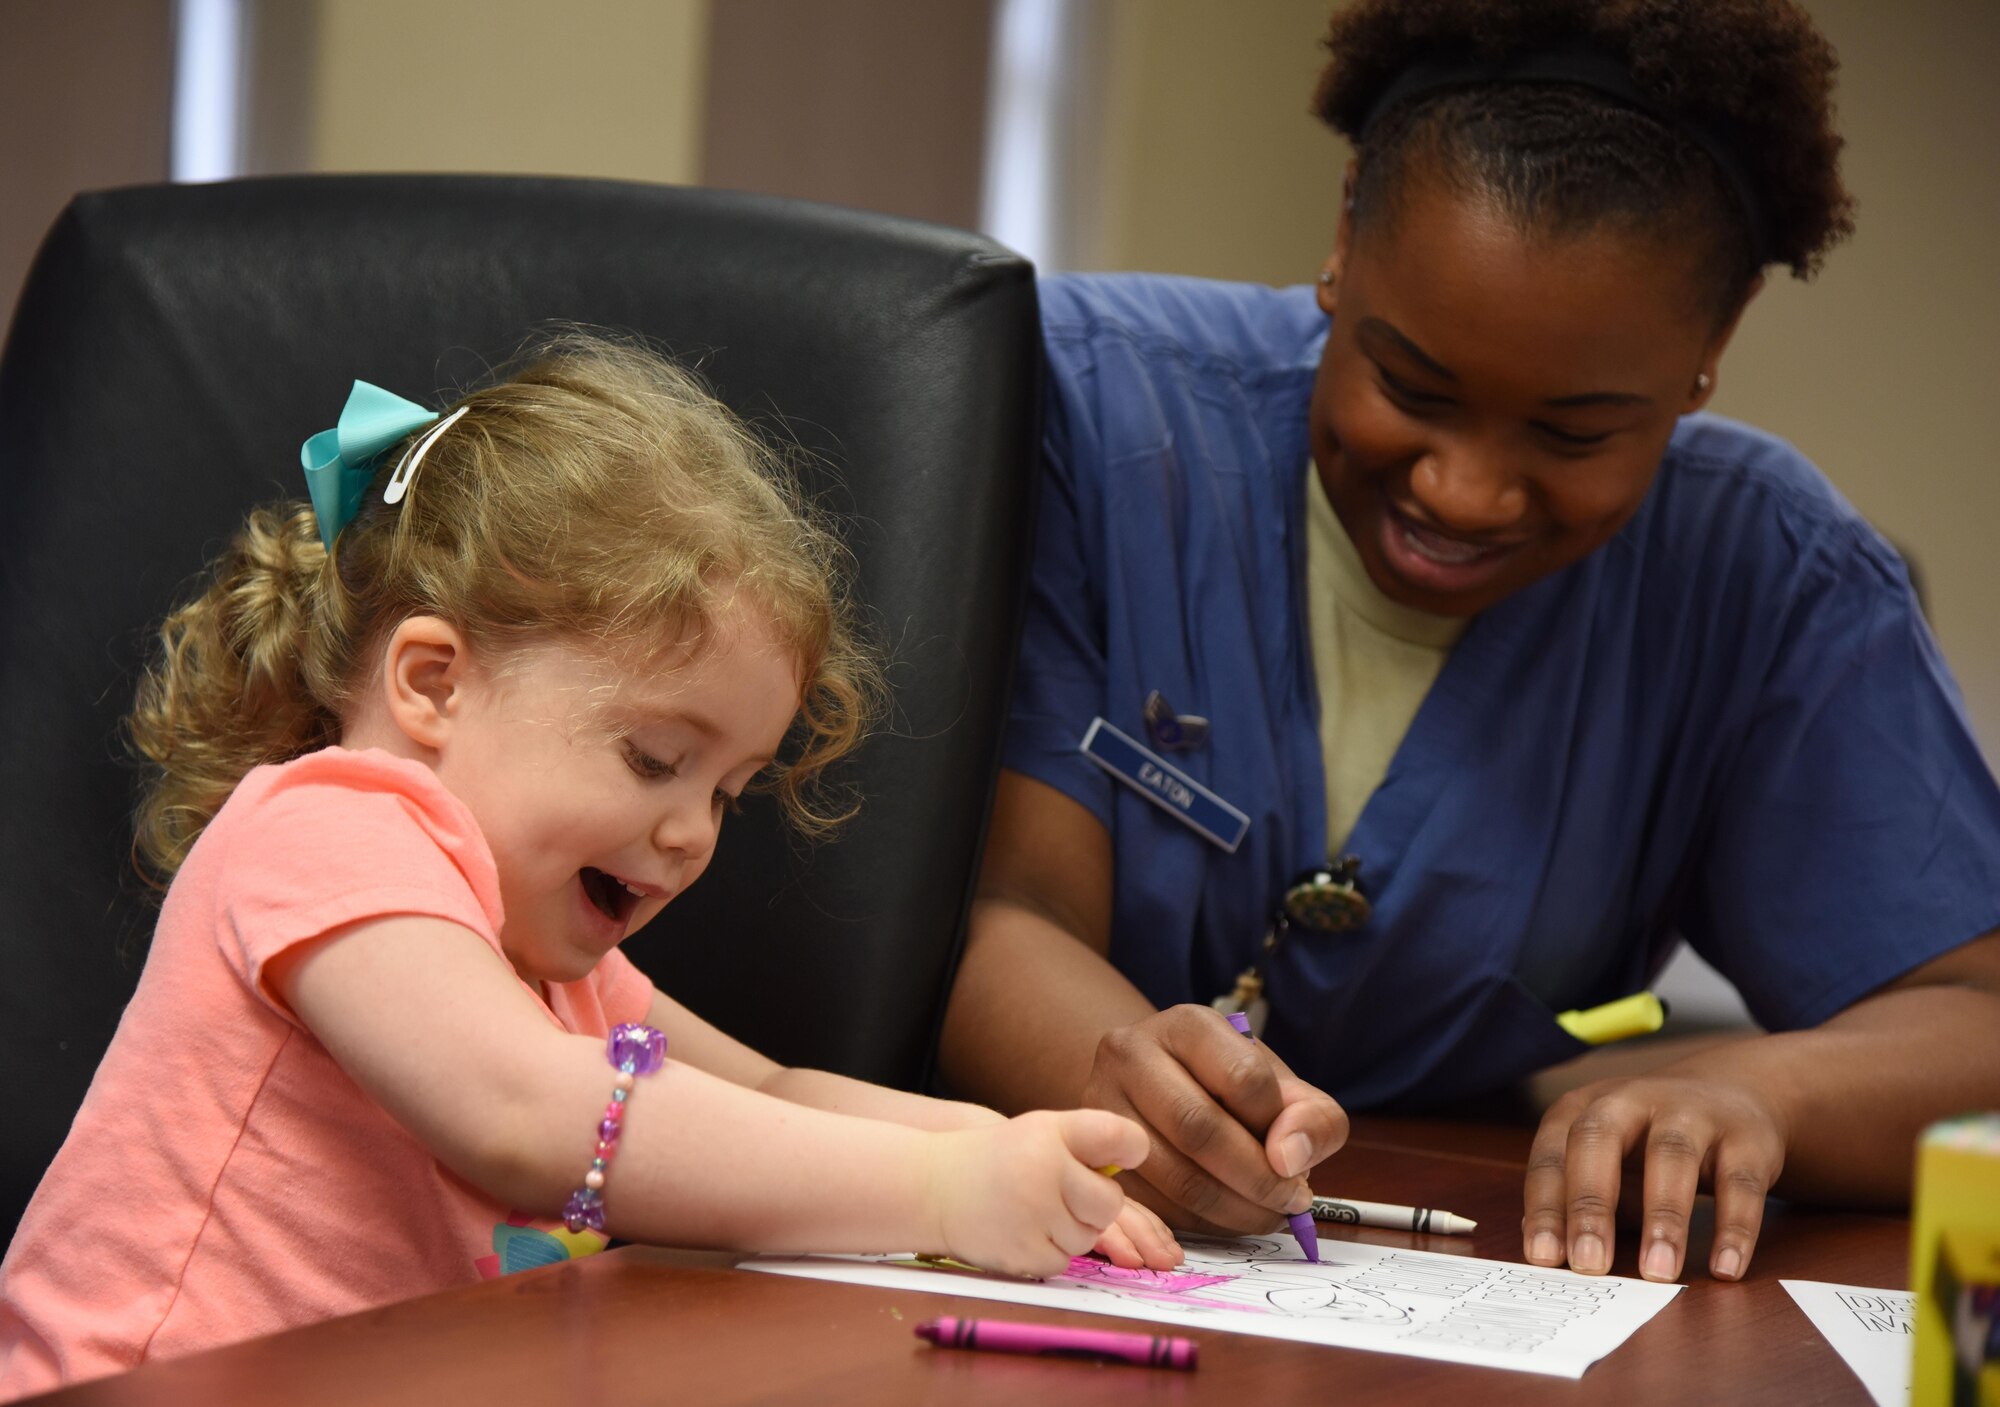 Senior Airman Chantel Eaton, 81st Dental Squadron dental technician, colors with Sarah Goebel, daughter of Tech. Sgt. Eric Goebel, 81st Security Forces Squadron flight chief, during the 7th Annual Give Kids a Smile Day at the dental clinic March 1, 2017, on Keesler Air Force Base, Miss. The event was held in recognition of National Children’s Dental Health Month and included free dental exams, radiographs and cleanings for more than 95 children age 2 and older. (U.S. Air Force photo by Kemberly Groue)